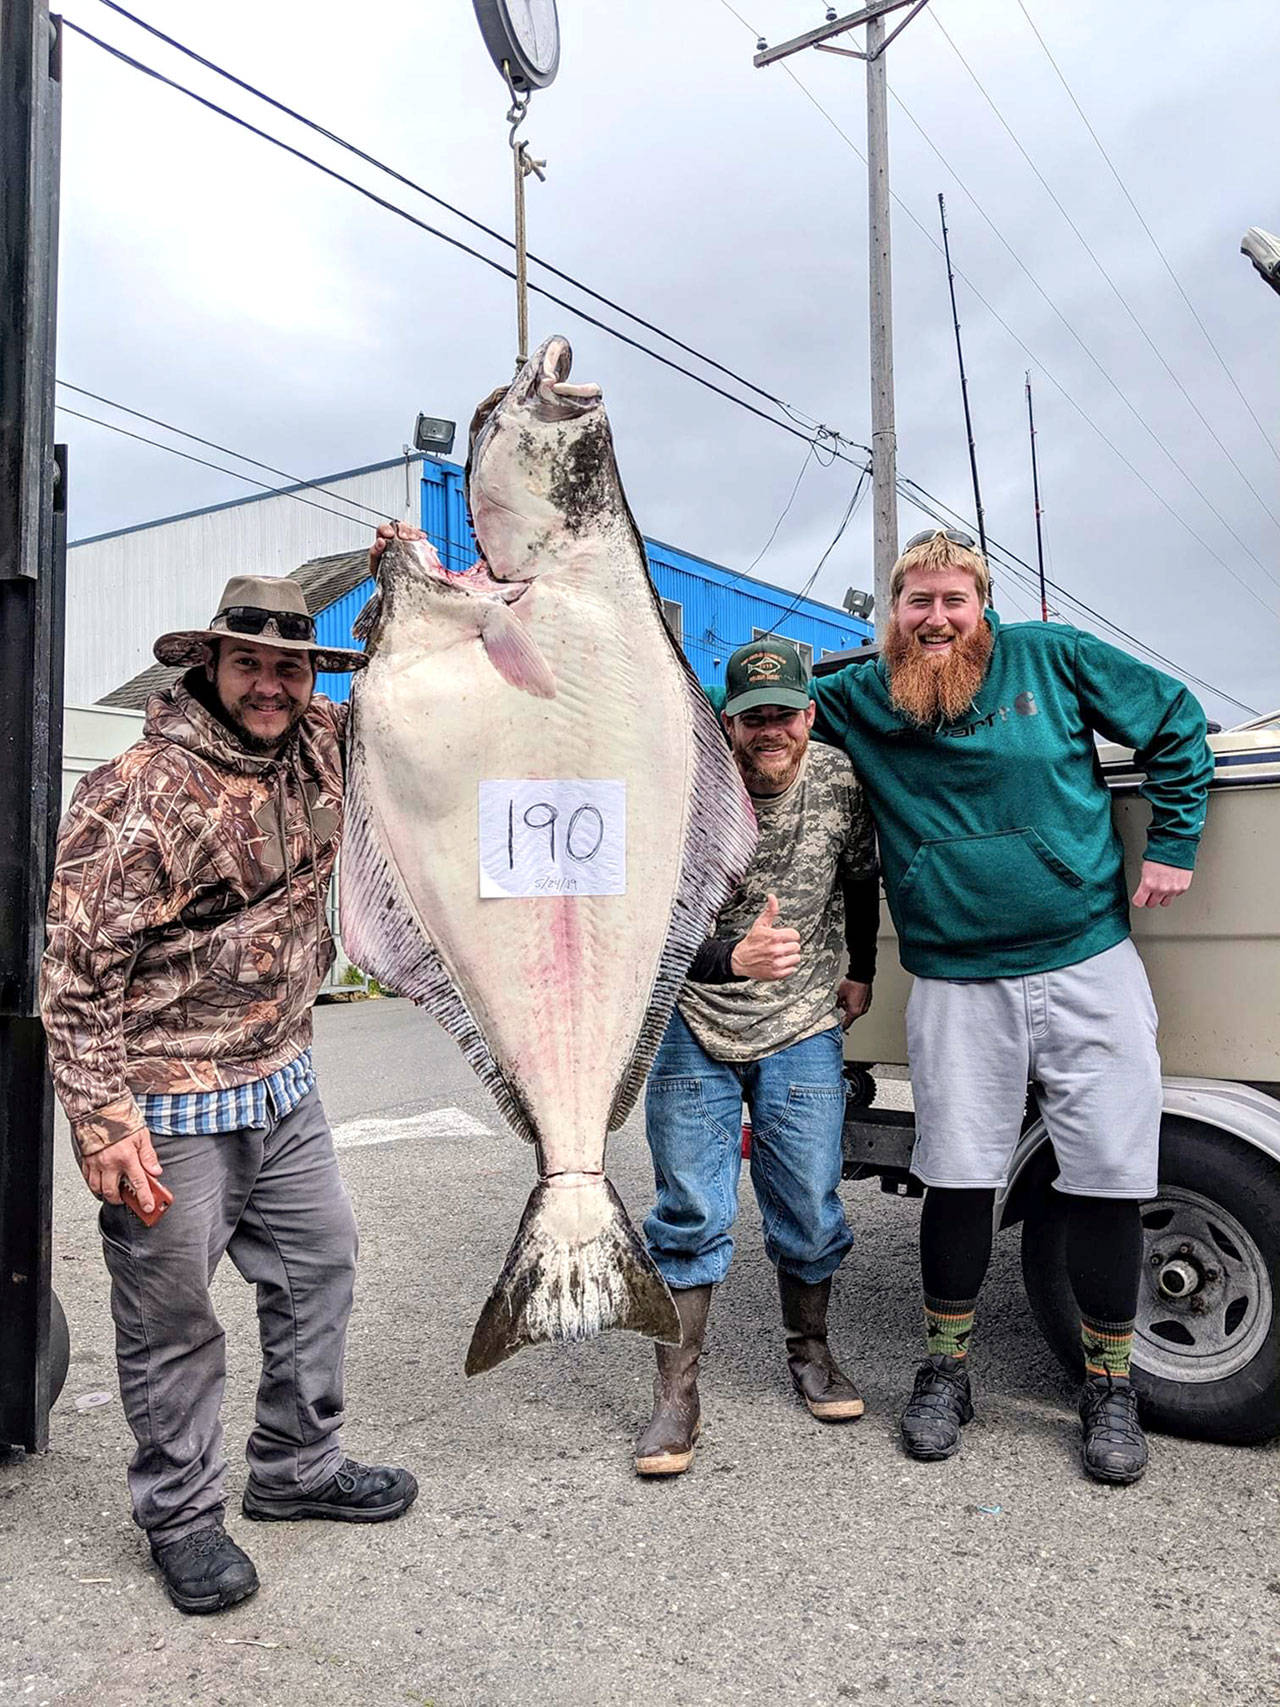 Halibut anglers, from left, Nick Roberts, Bob Harrison and Craig Rice, teamed up to bring aboard this 190-pound halibut in May 2019 off Port Angeles. It’s the second halibut catch of more than 155 pounds that Harrison has been involved in since 2017. (Submitted photo)